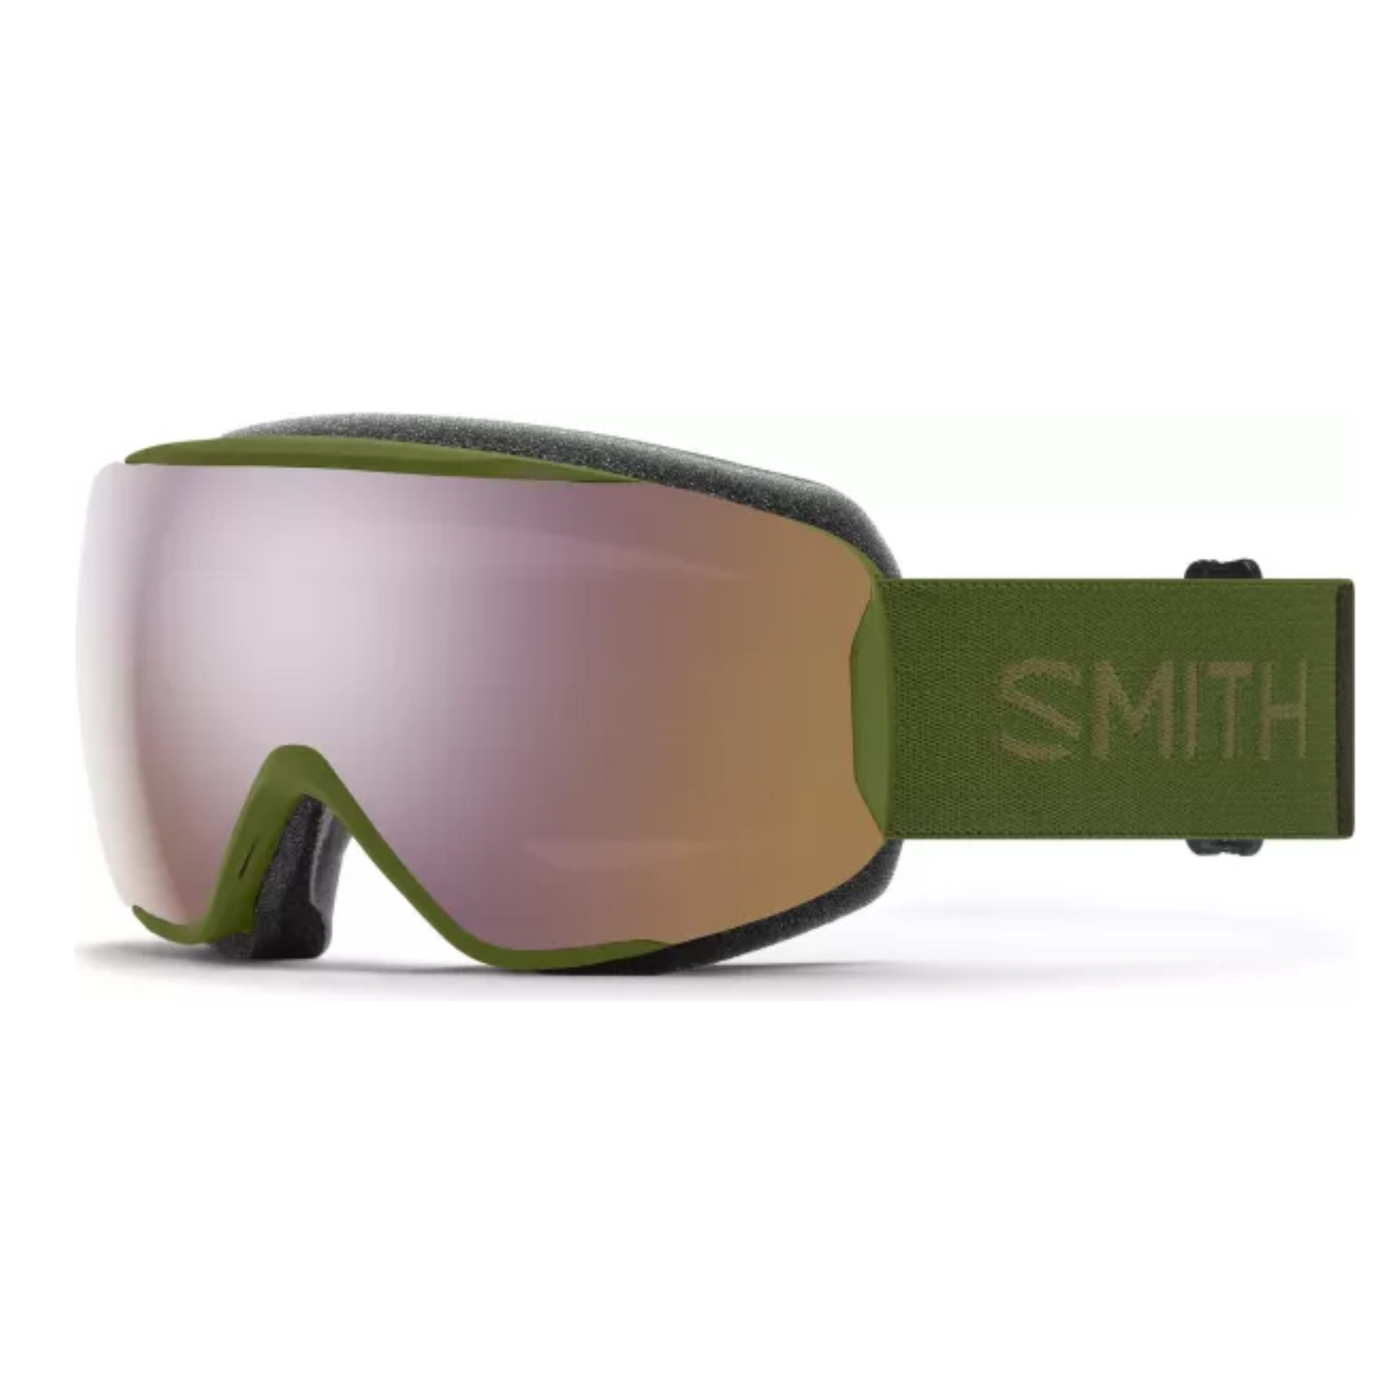 Smith Skibrille Moment olive 22 everyday rose gold mirror